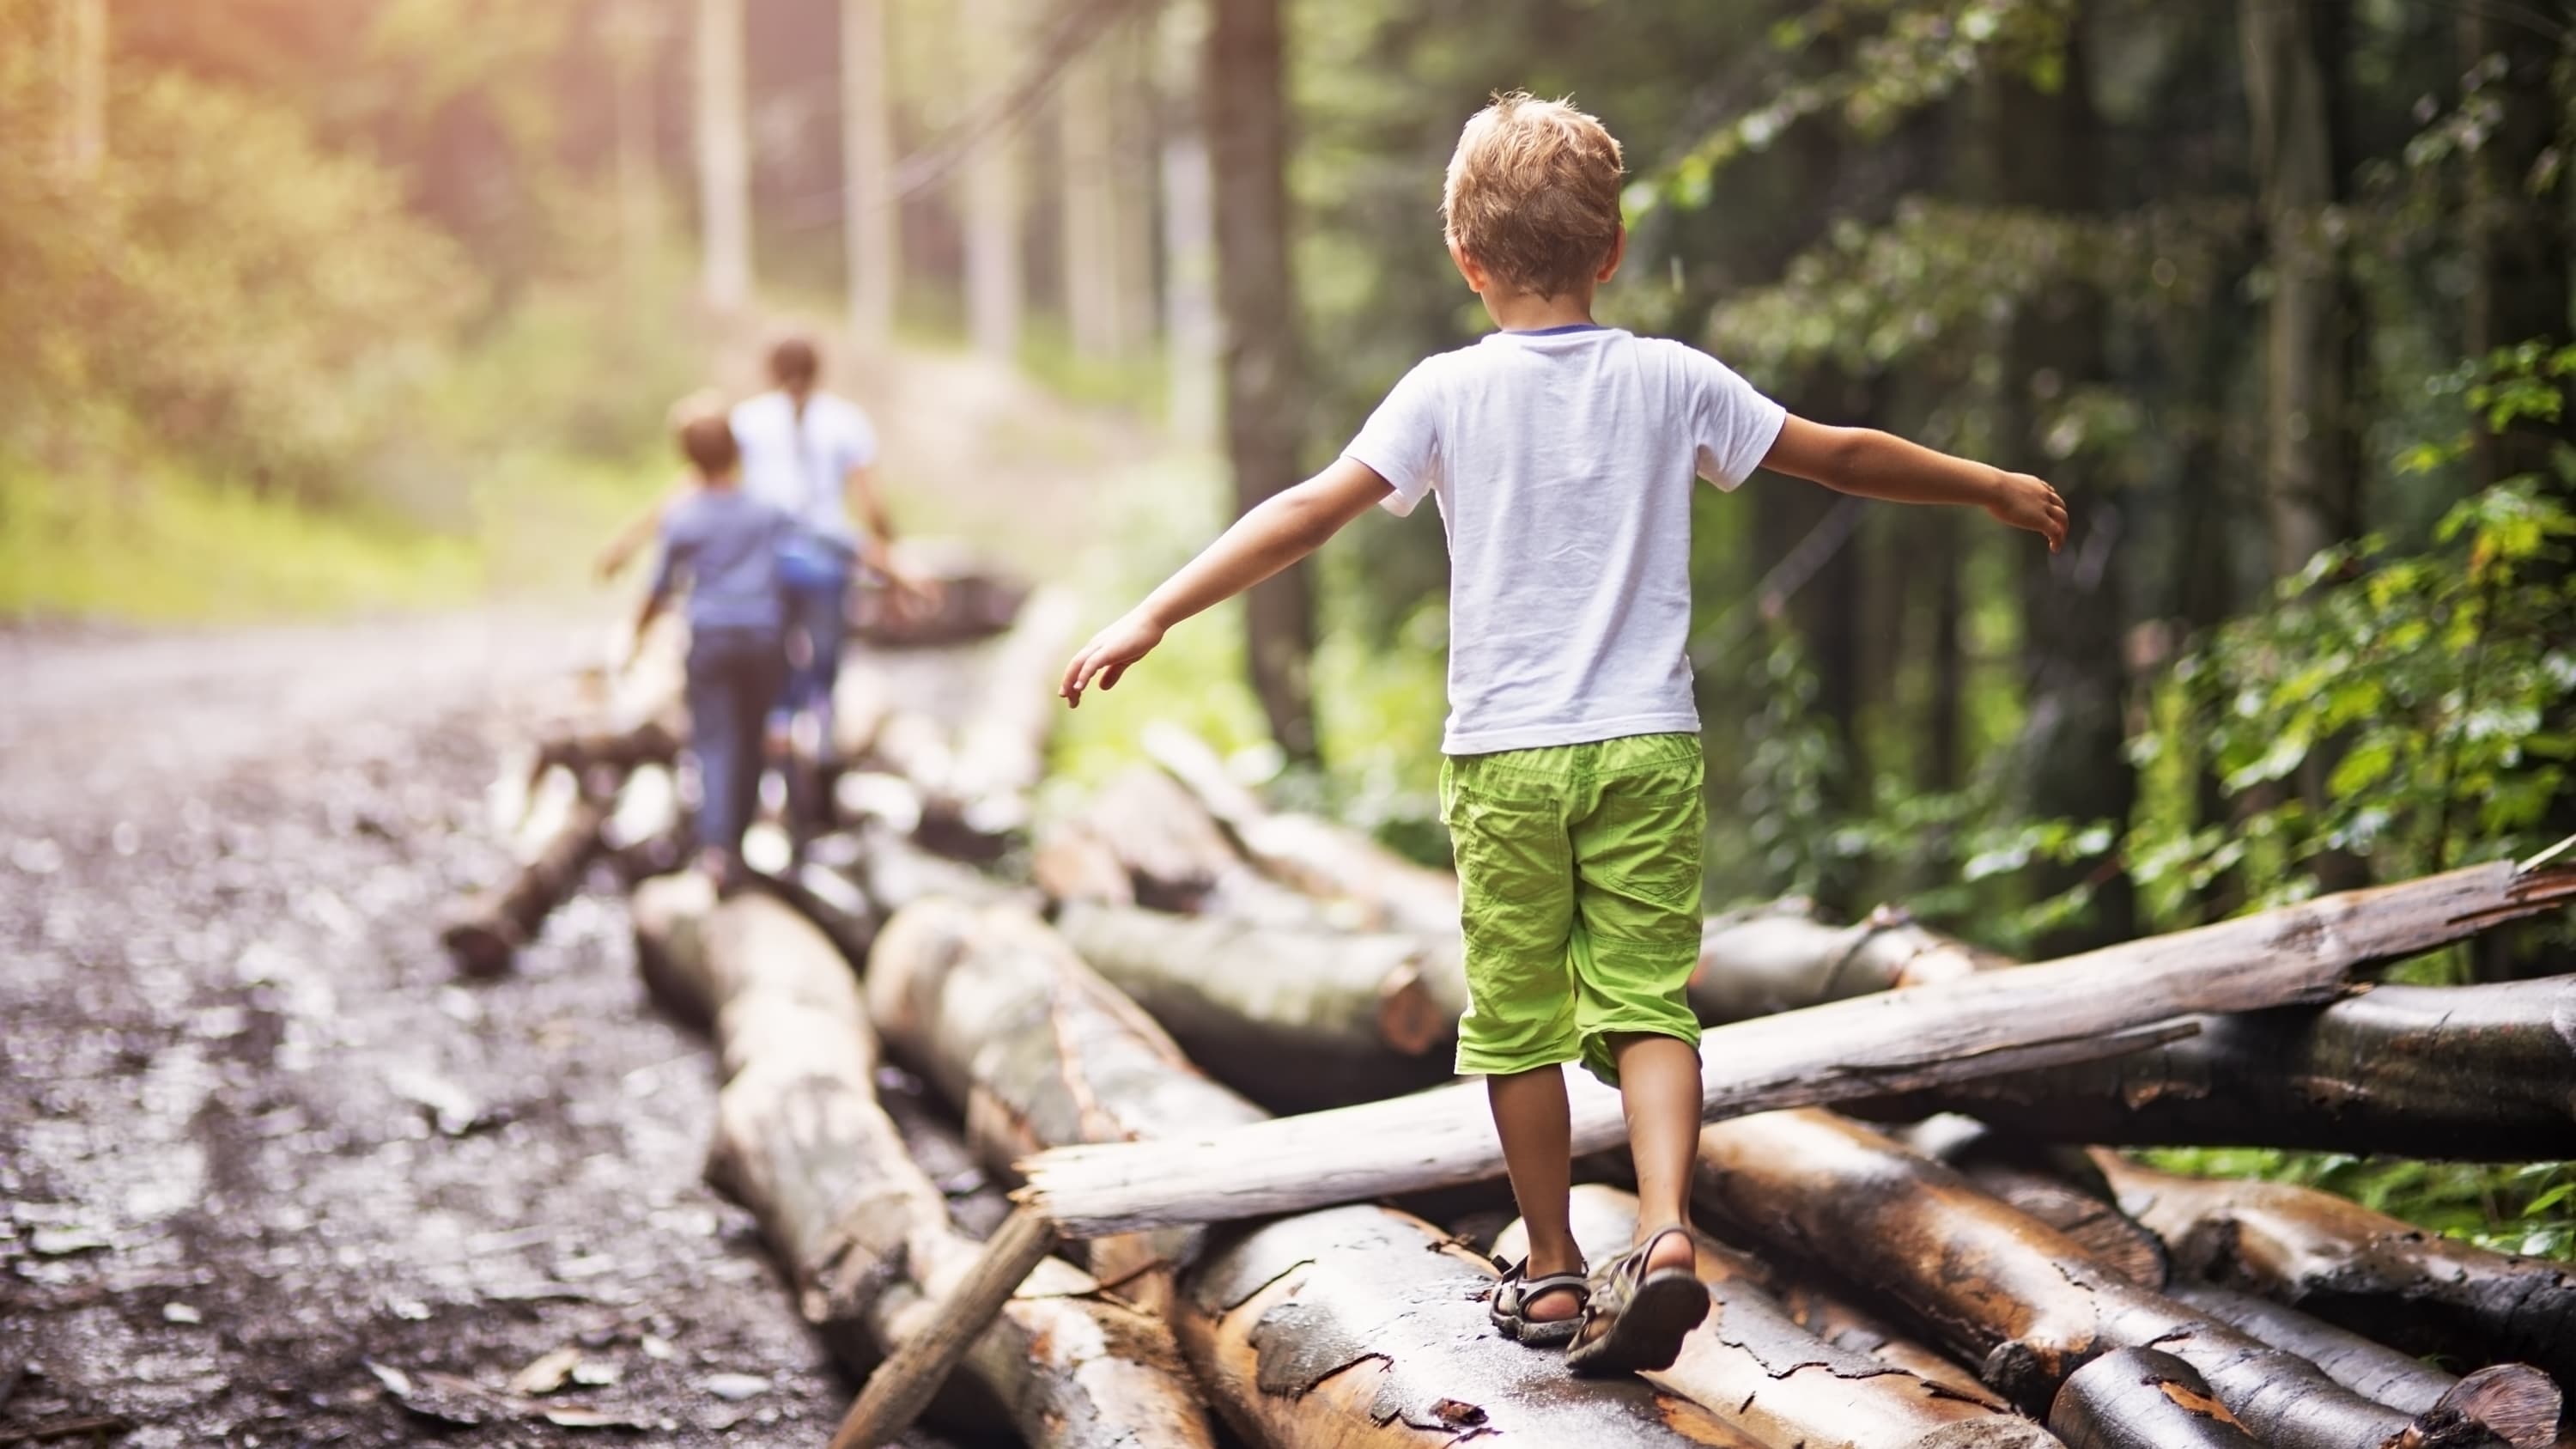 Children who might have juvenile idiopathic arthritis try to balance as they walk across some logs in the woods.